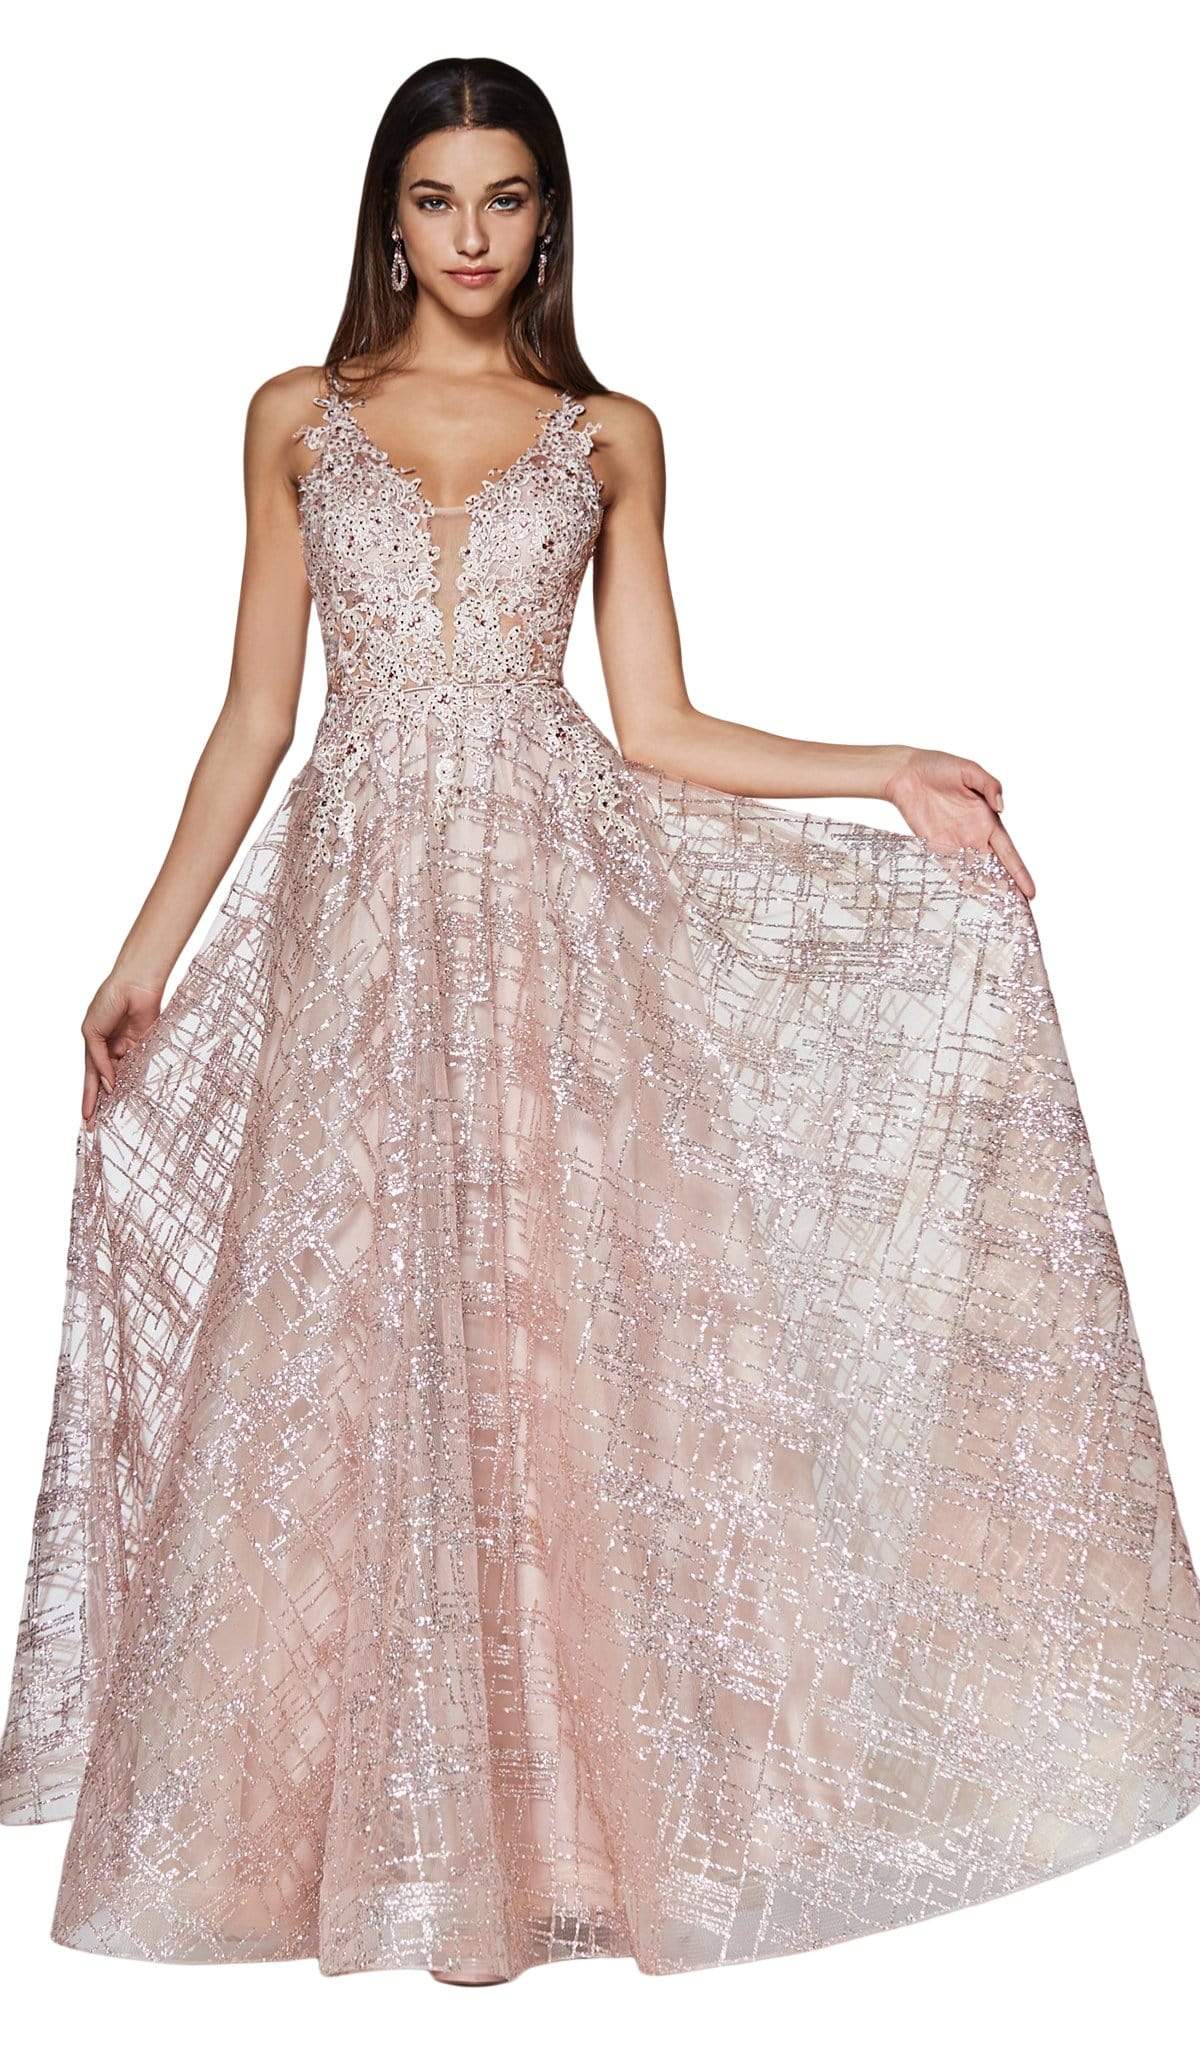 Cinderella Divine - CJ515 Plunging Illusion Beaded Lace Bodice Gown Prom Dresses 2 / Rose Gold